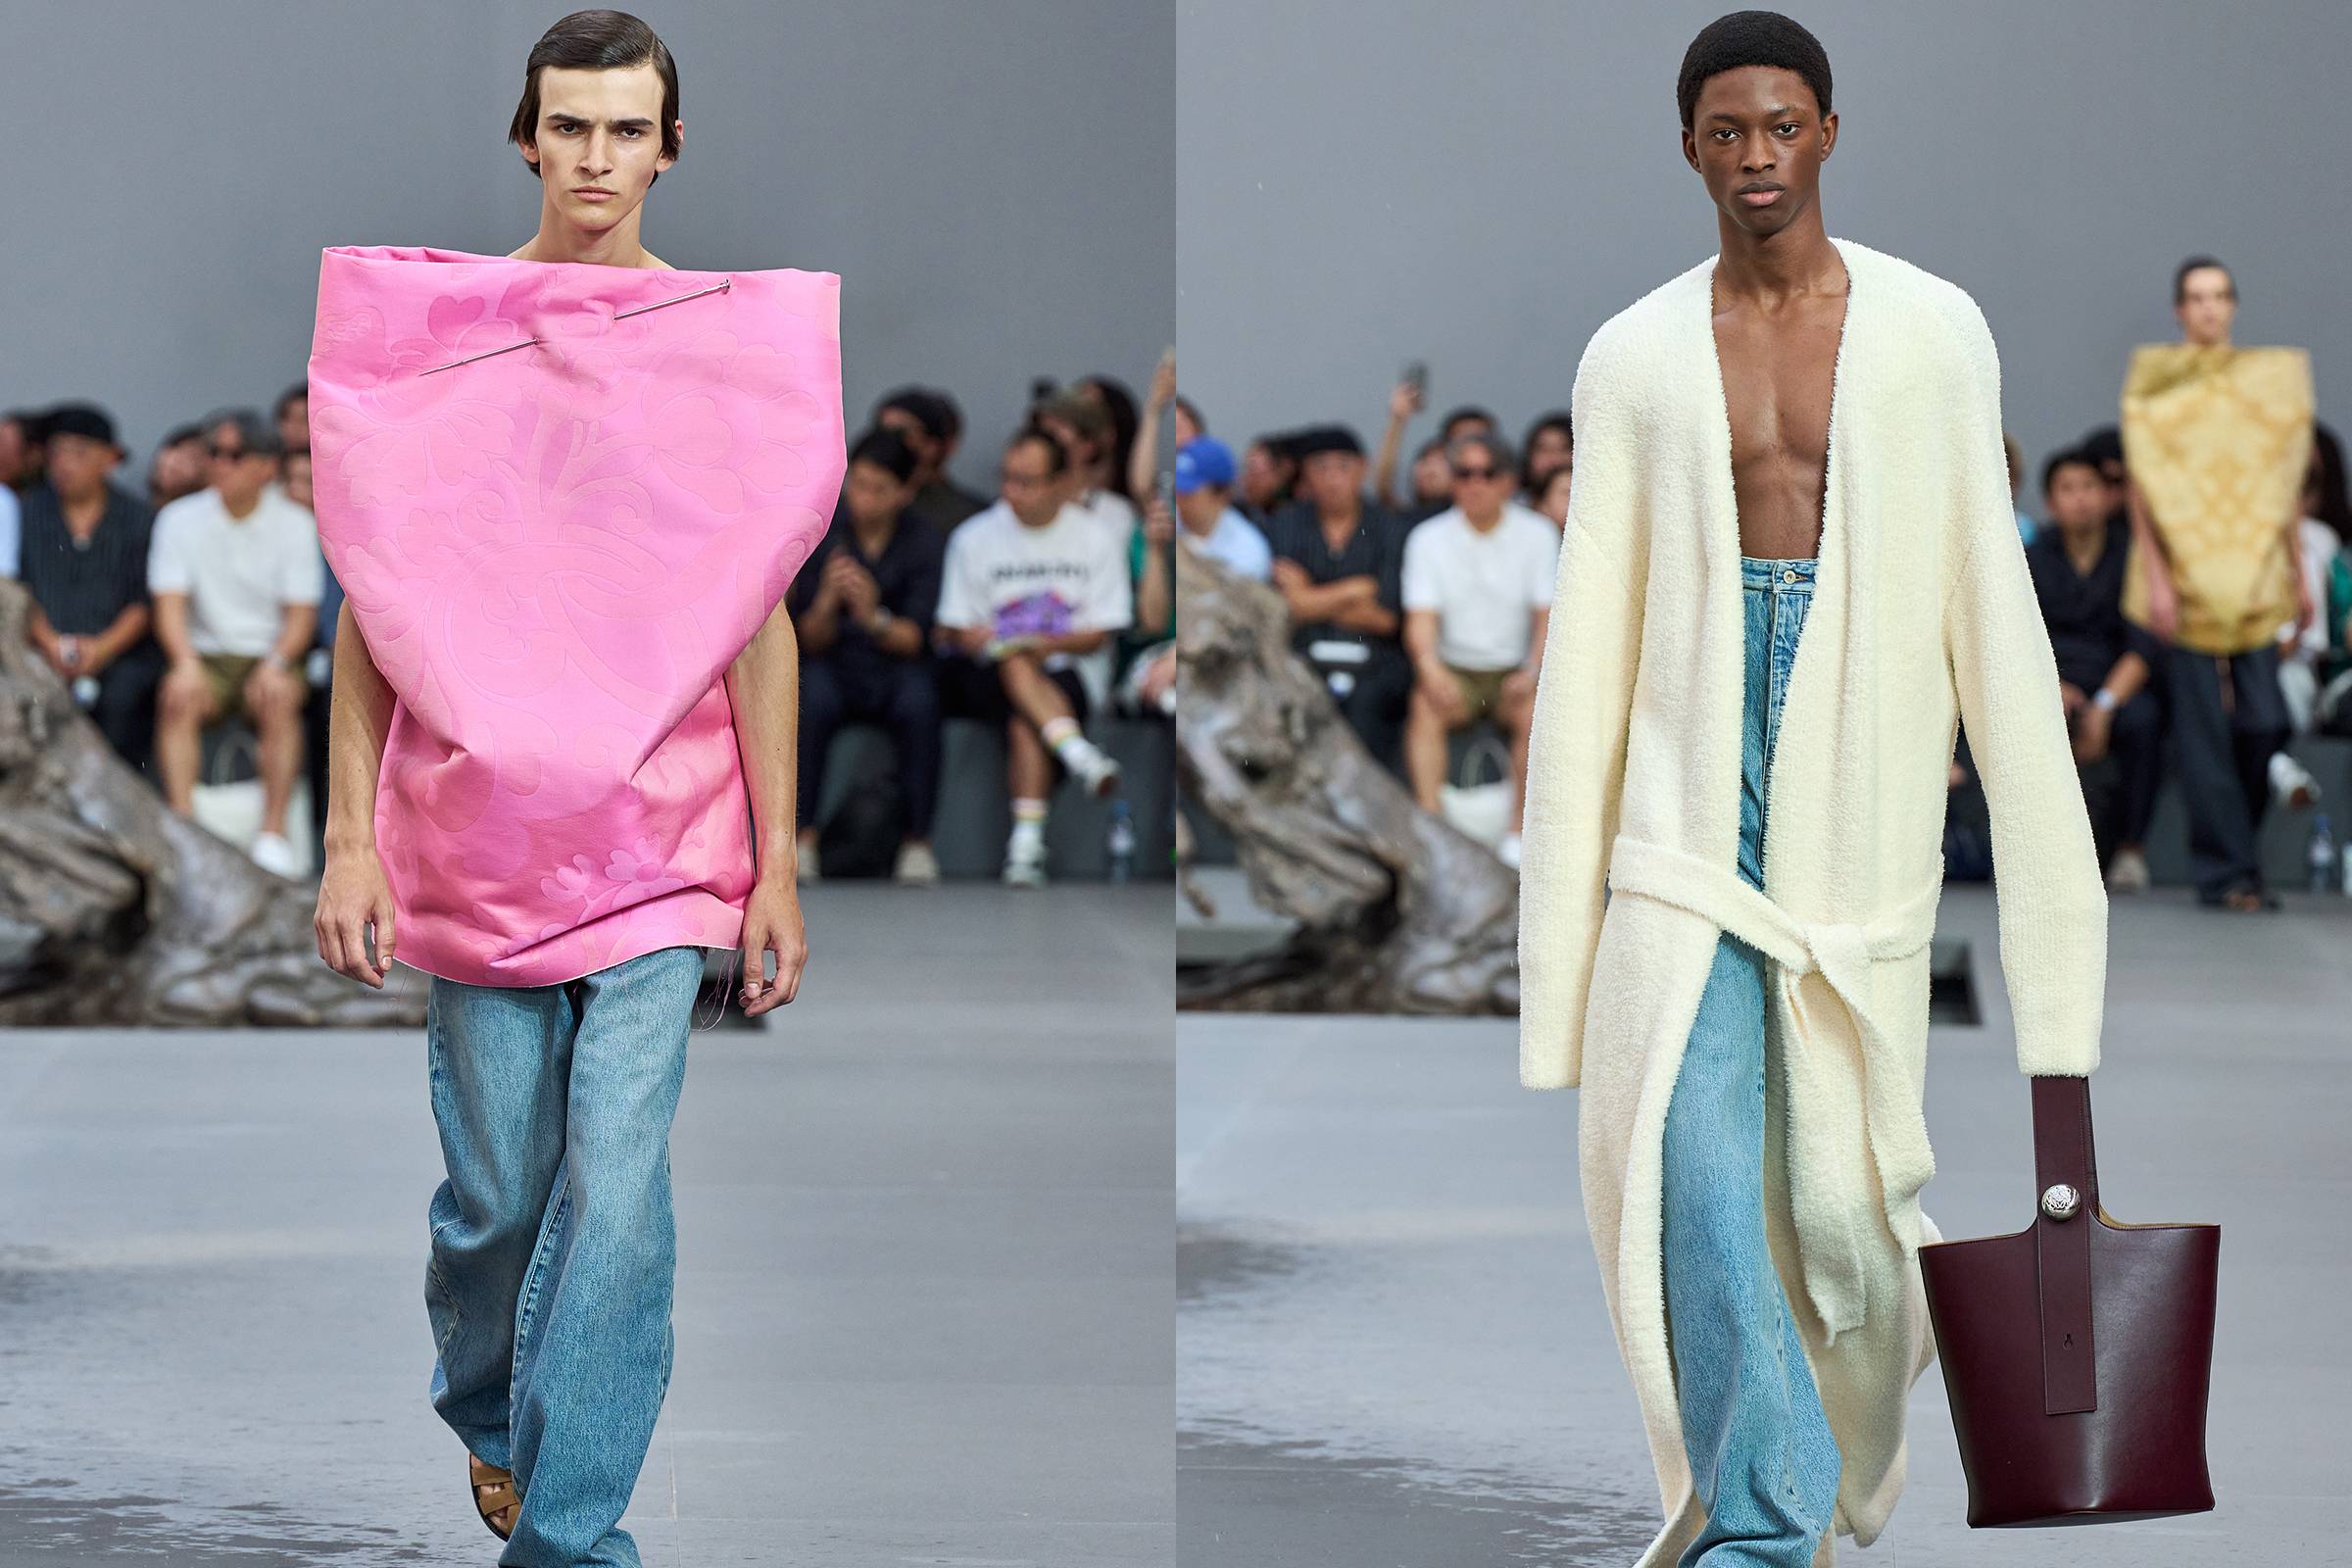 Differences Between Paris and New York Fashion Weeks